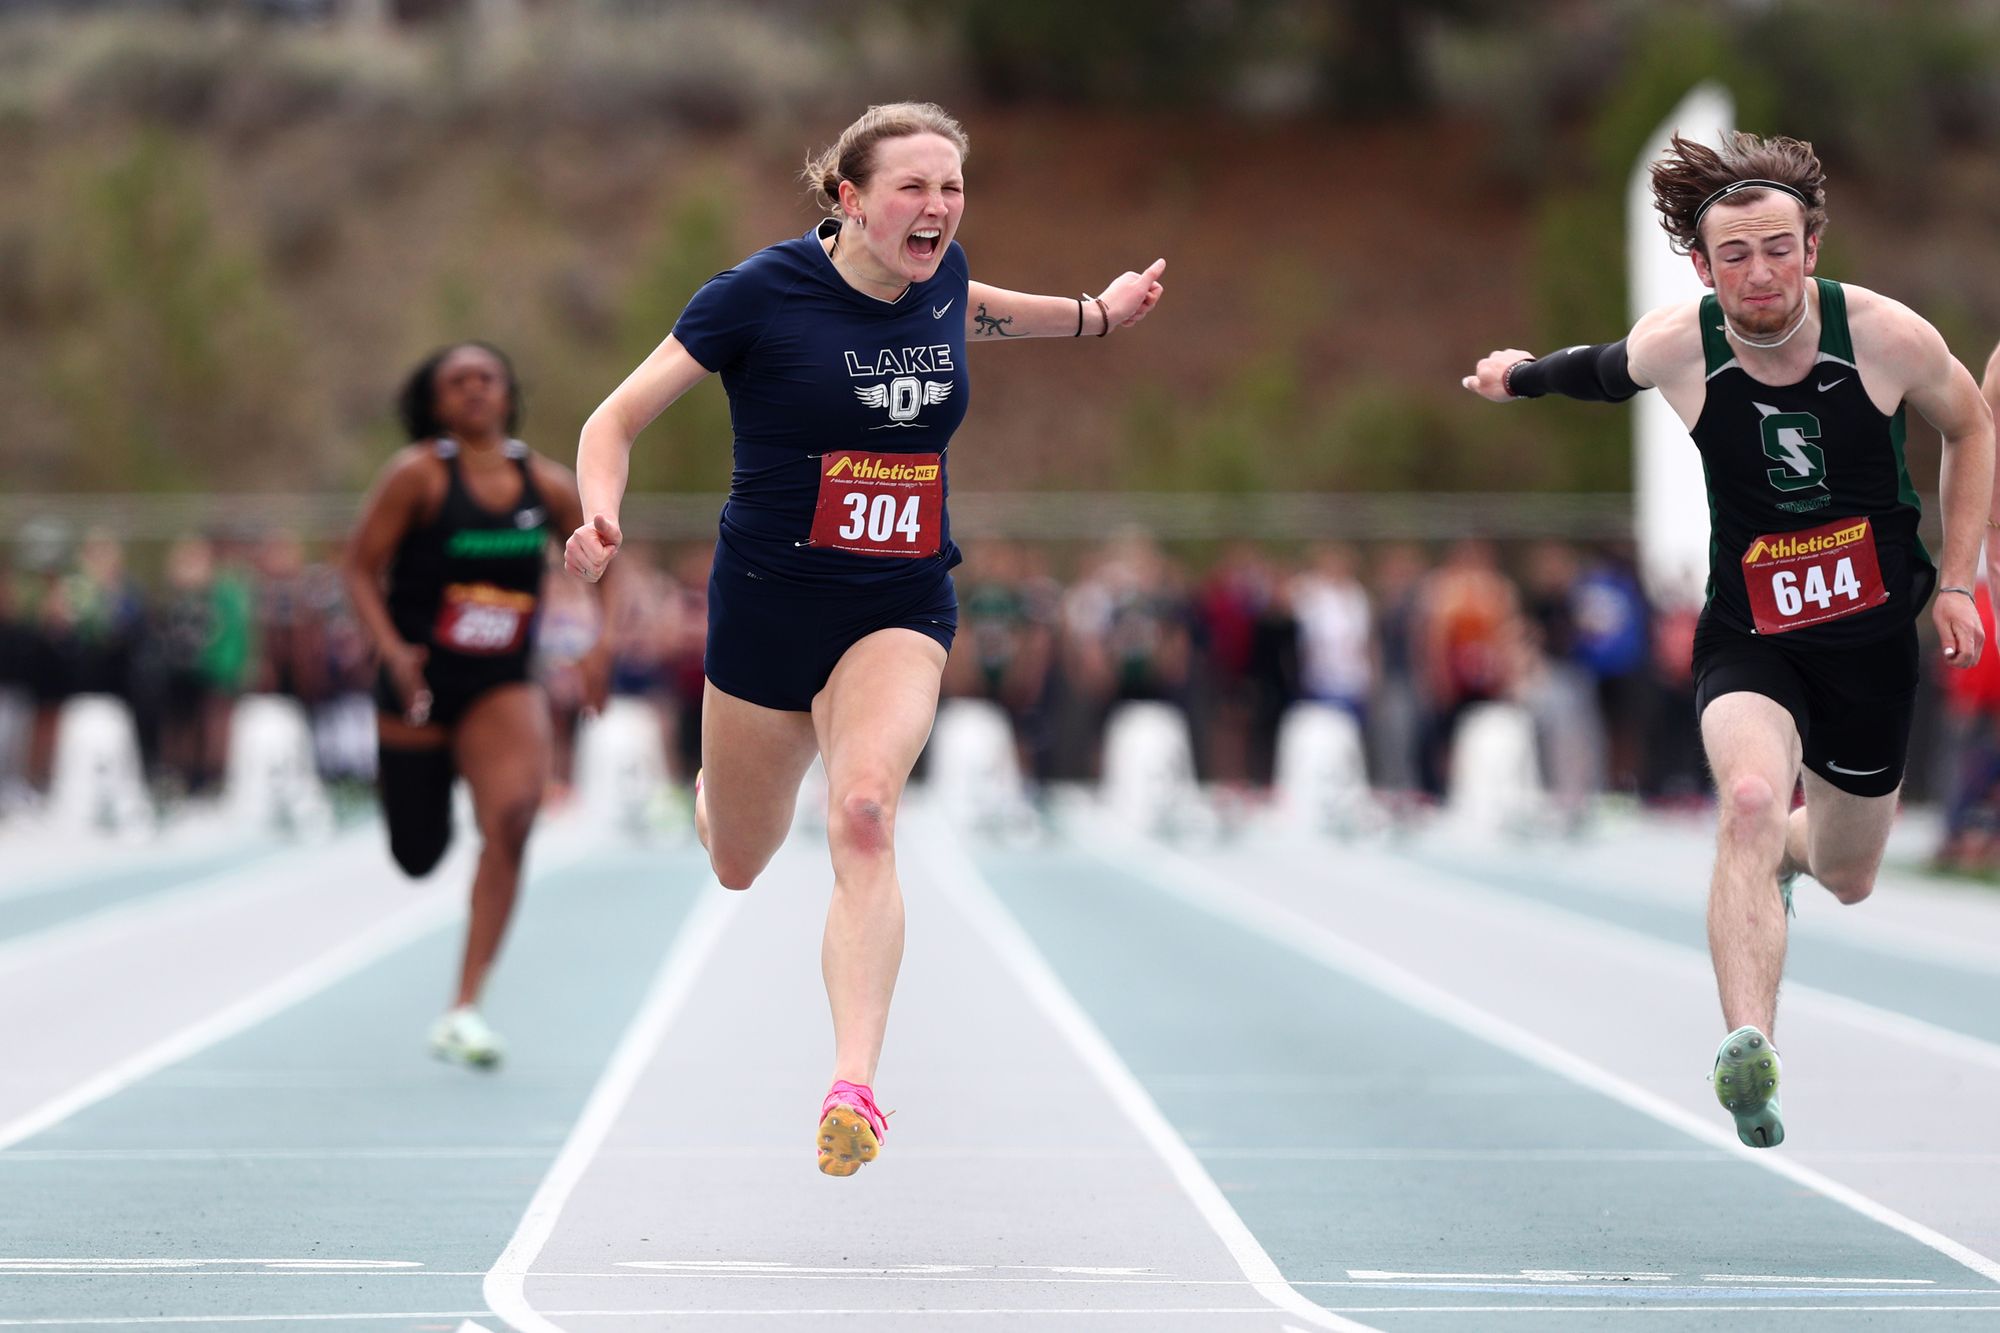 Lake Oswego High School junior Mia Brahe-Pedersen won the mixed-gender 100 meters in 11.08 seconds on May 6 at the Summit Invitational in Bend, Ore.